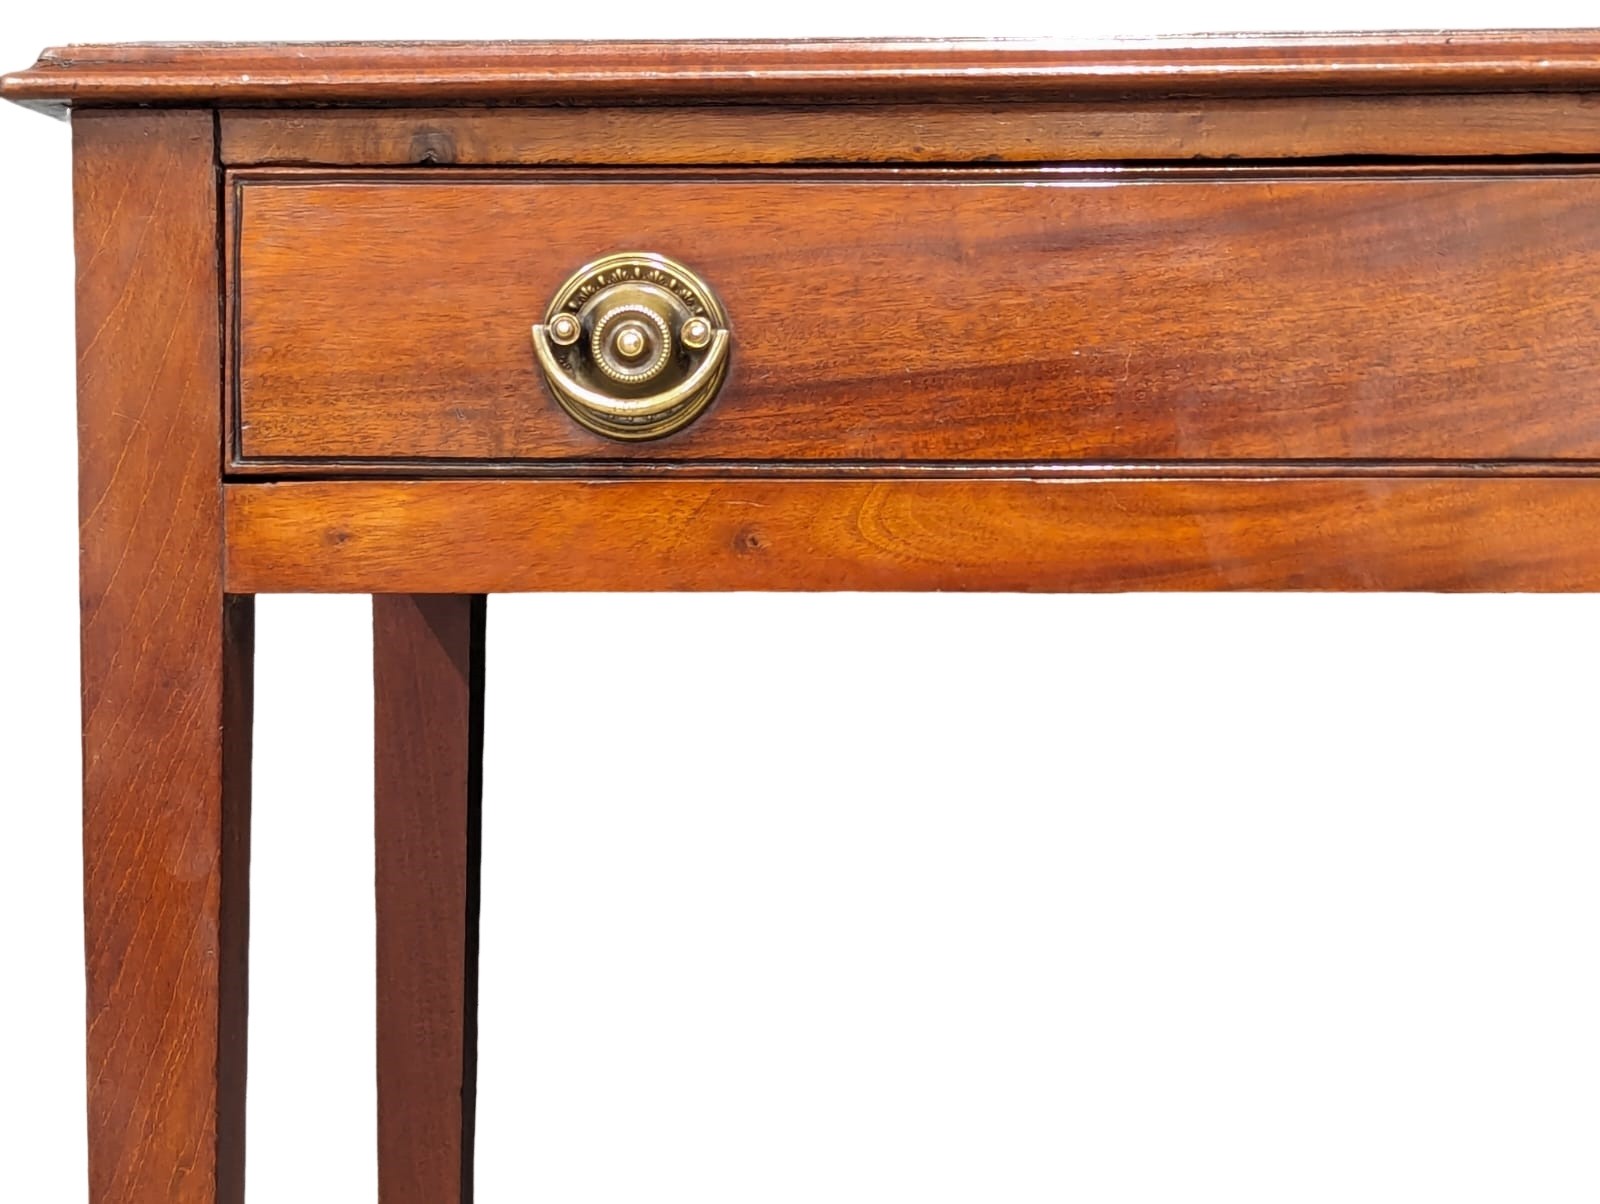 A mid 19th Century Georgian style mahogany side table with drawer, 82cm x 48.5cm x 71.5cm - Image 5 of 5